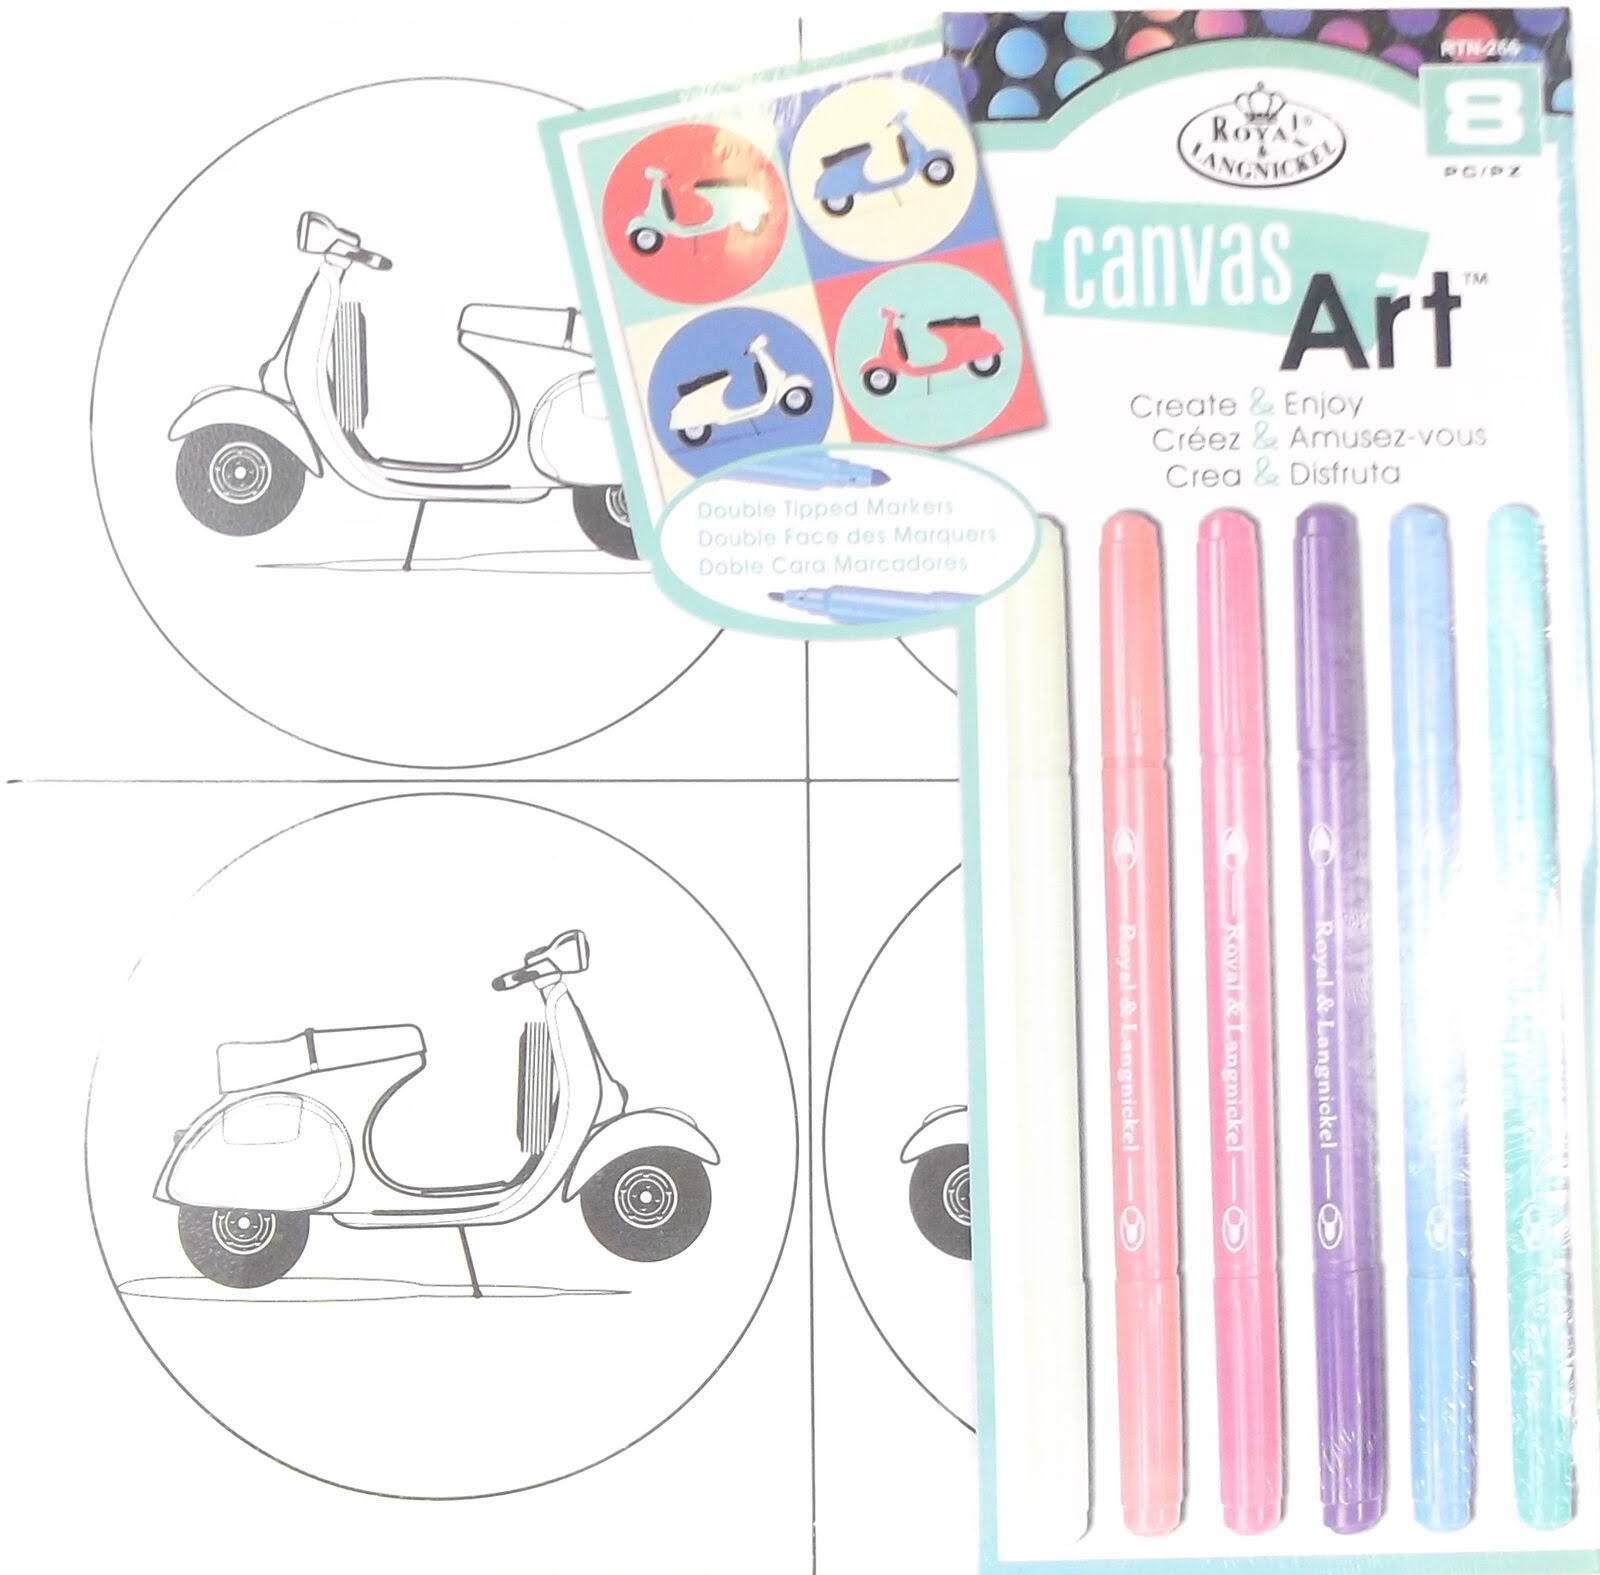 Royal & Langnickel Canvas Art Markers Kit Scooter